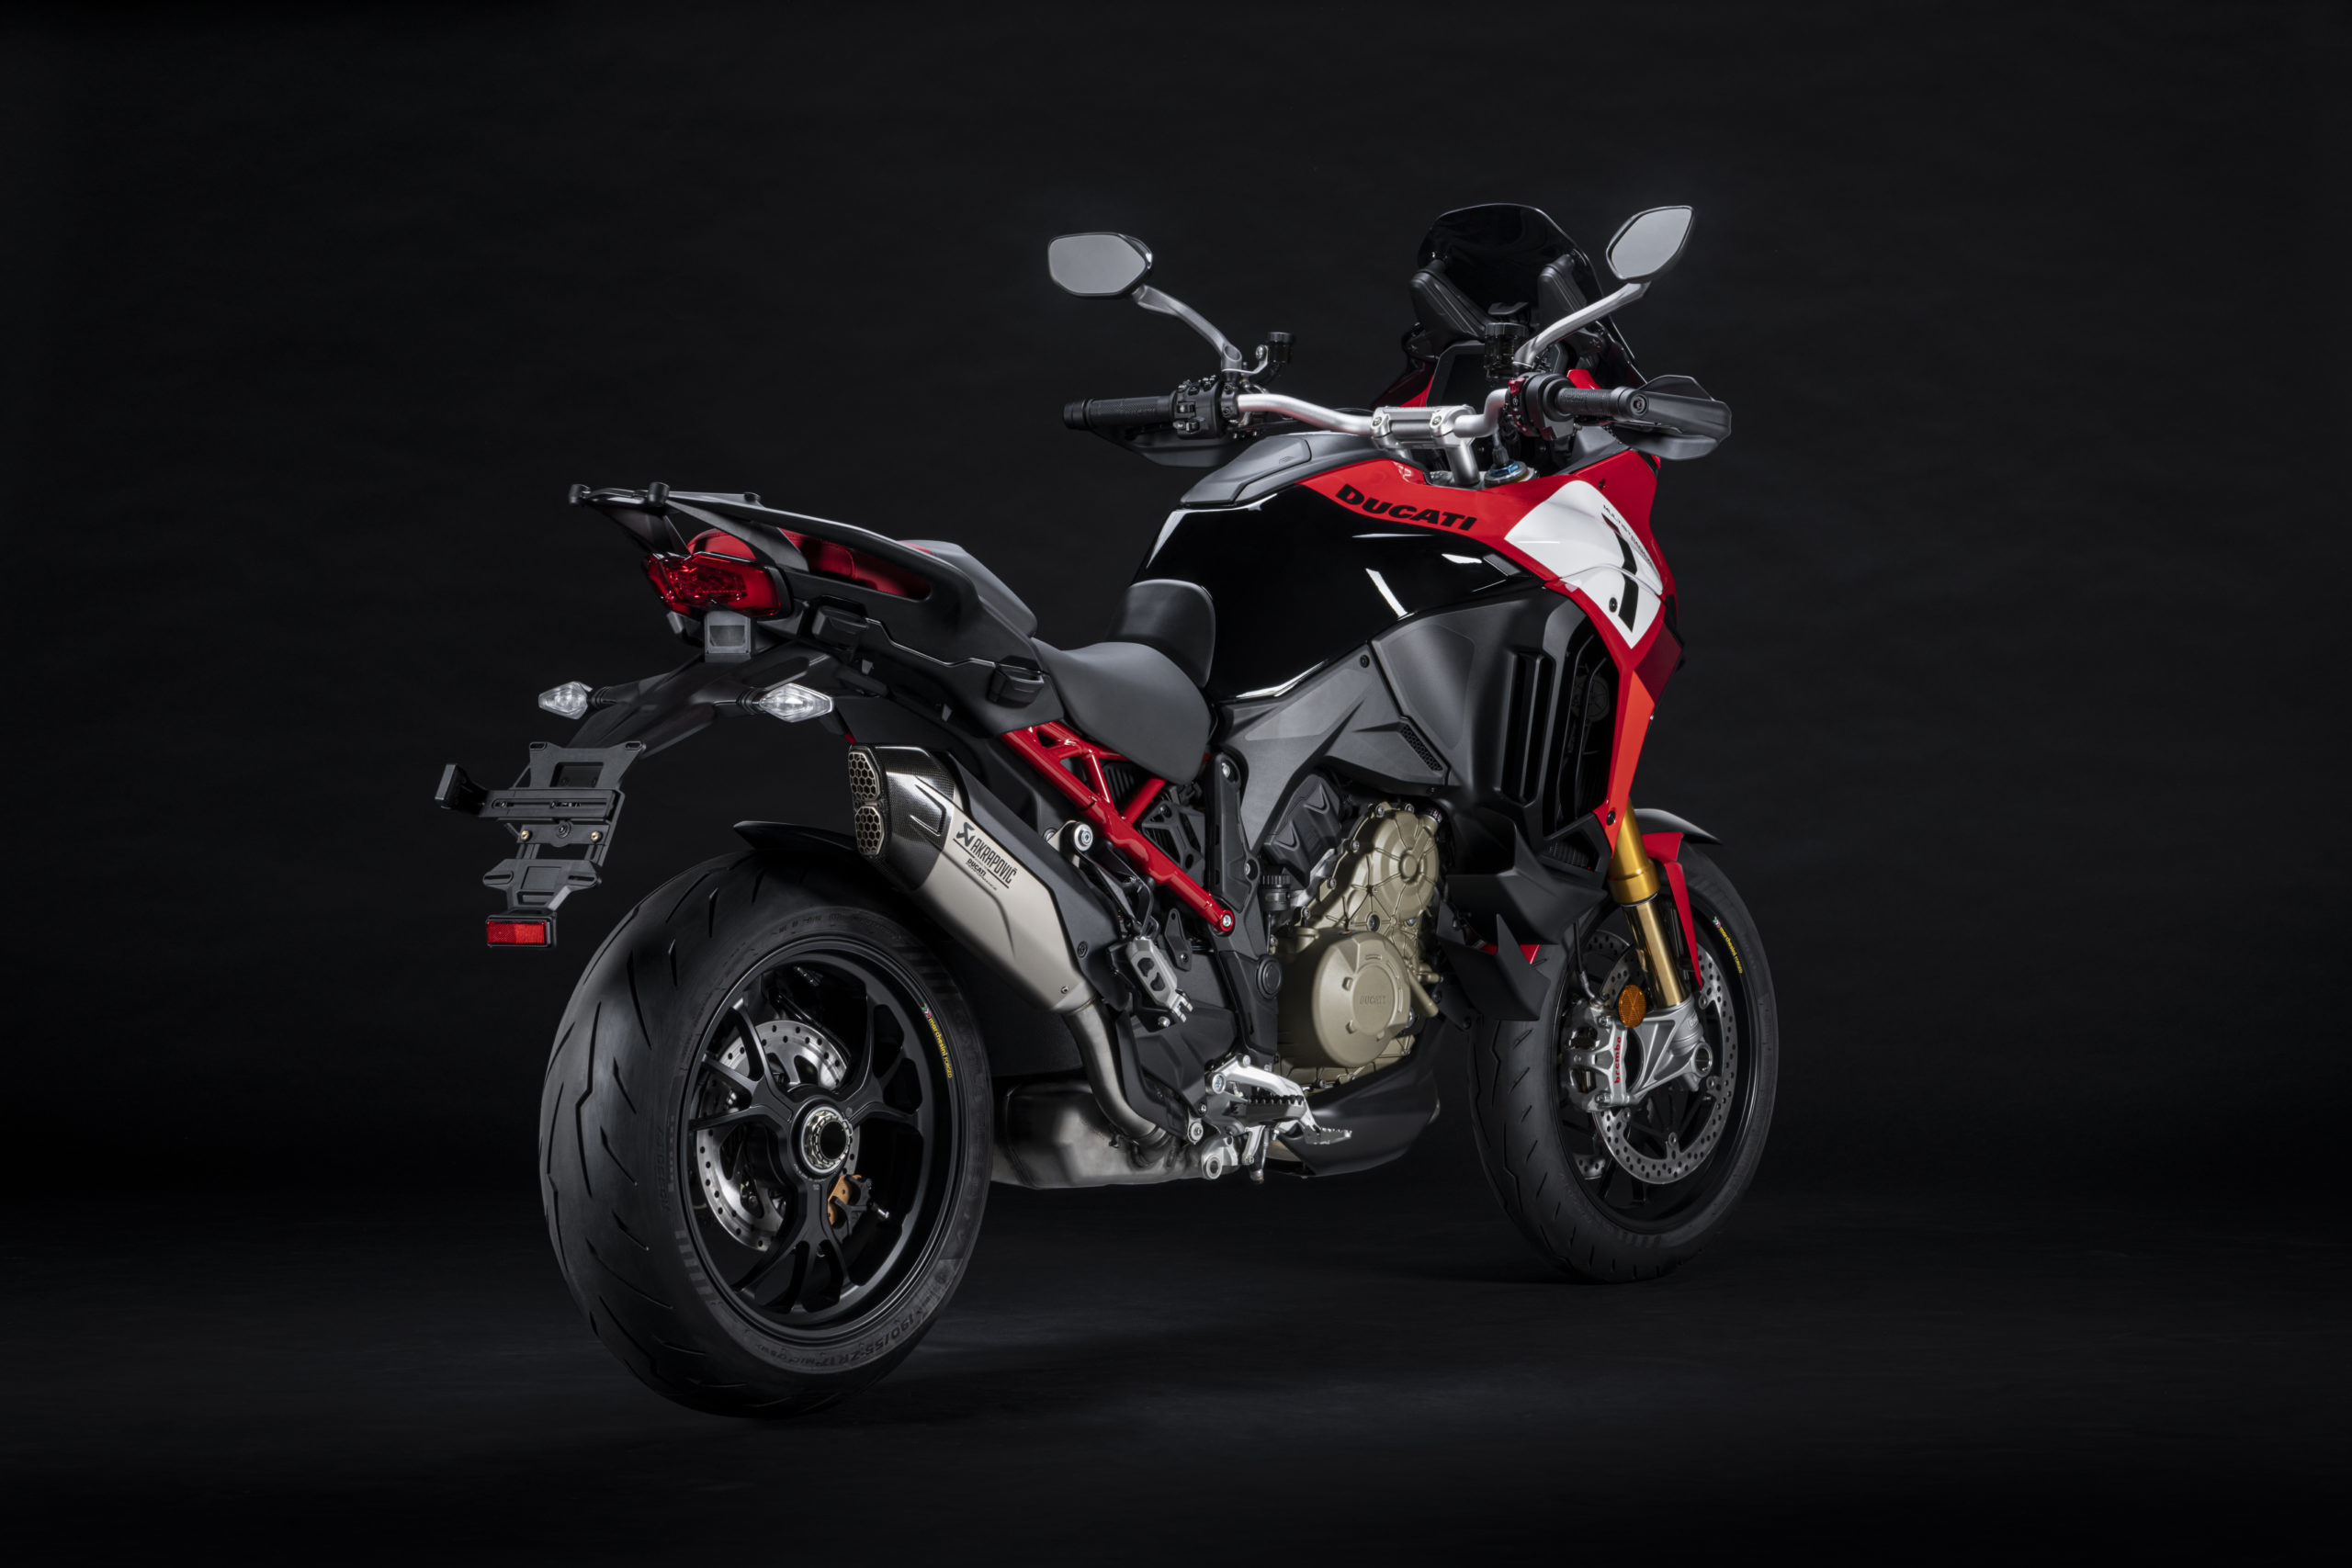 A back quarter view of the new Multistrada V4 Pikes Peak from Ducati - the third motorcycle to be debuted in their World Premiere series